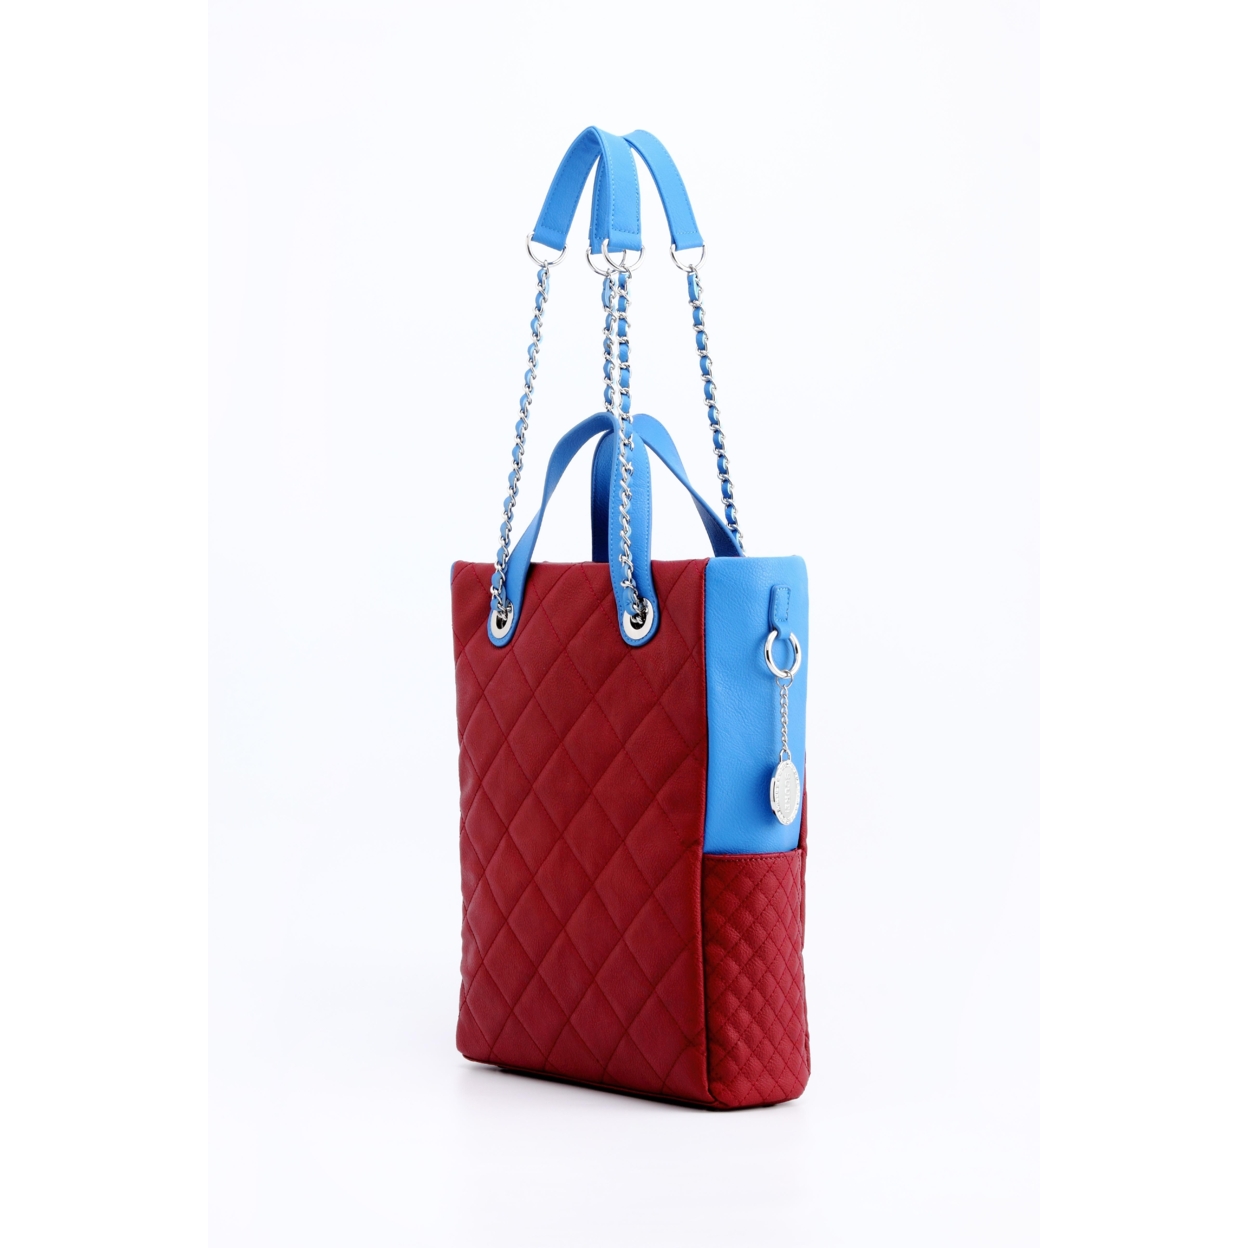 SCORE!'s Kat Travel Tote For Business, Work, Or School Quilted Shoulder Bag - Maroon And Blue